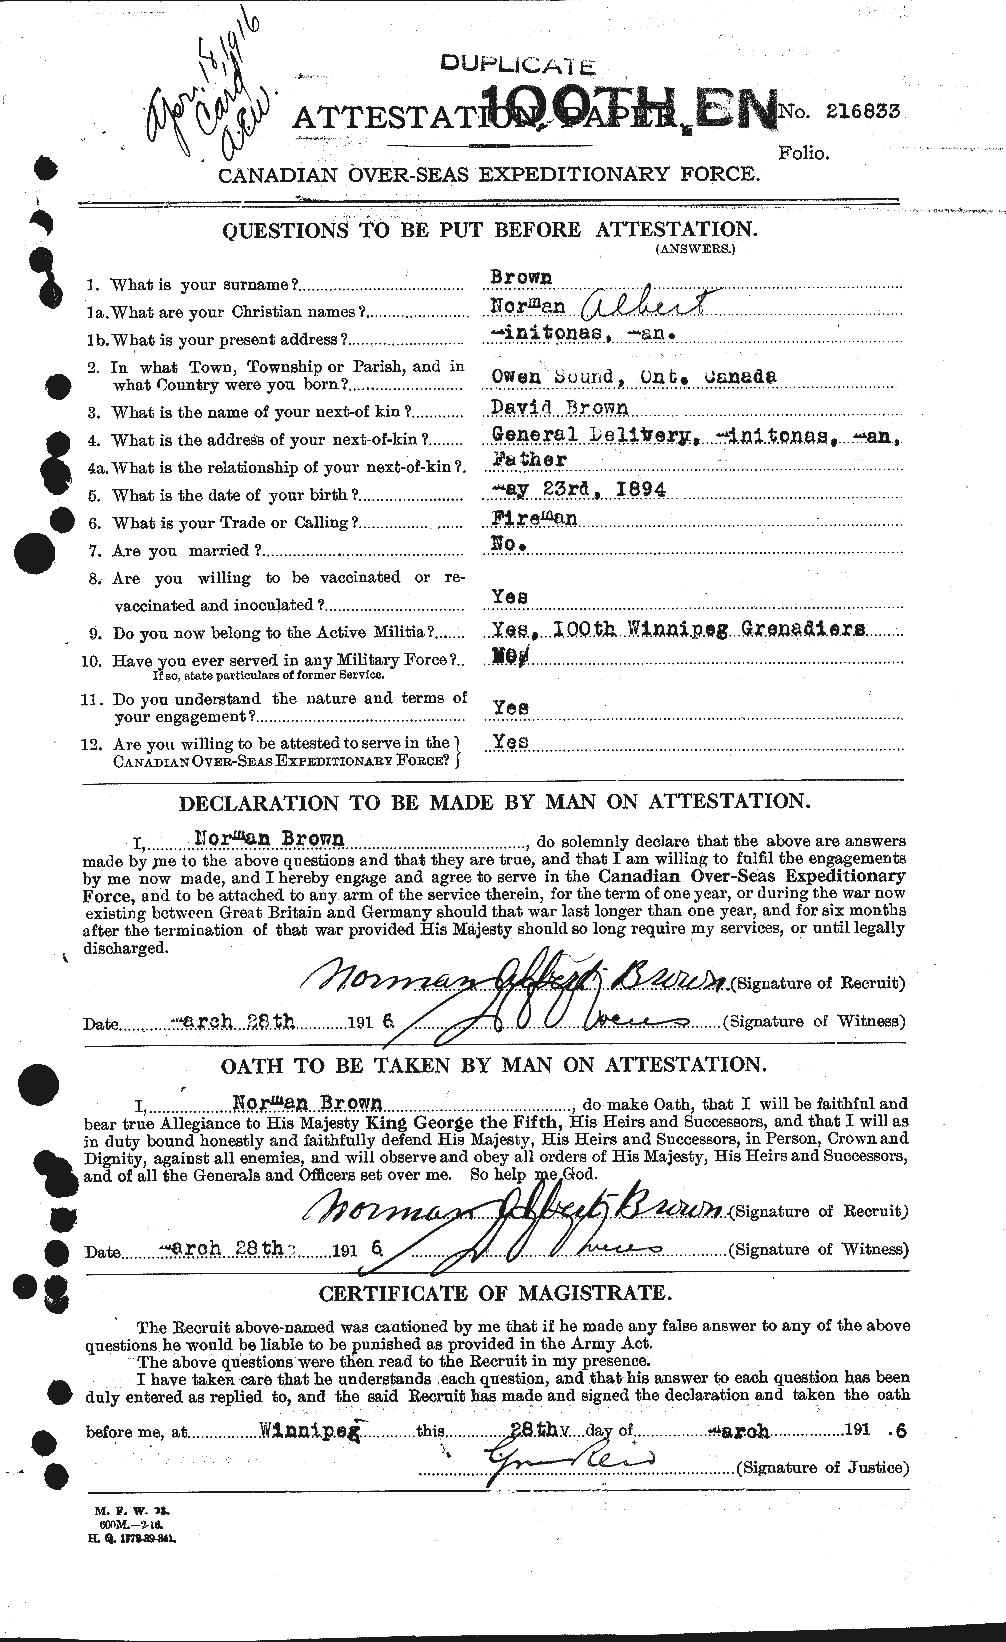 Personnel Records of the First World War - CEF 267106a